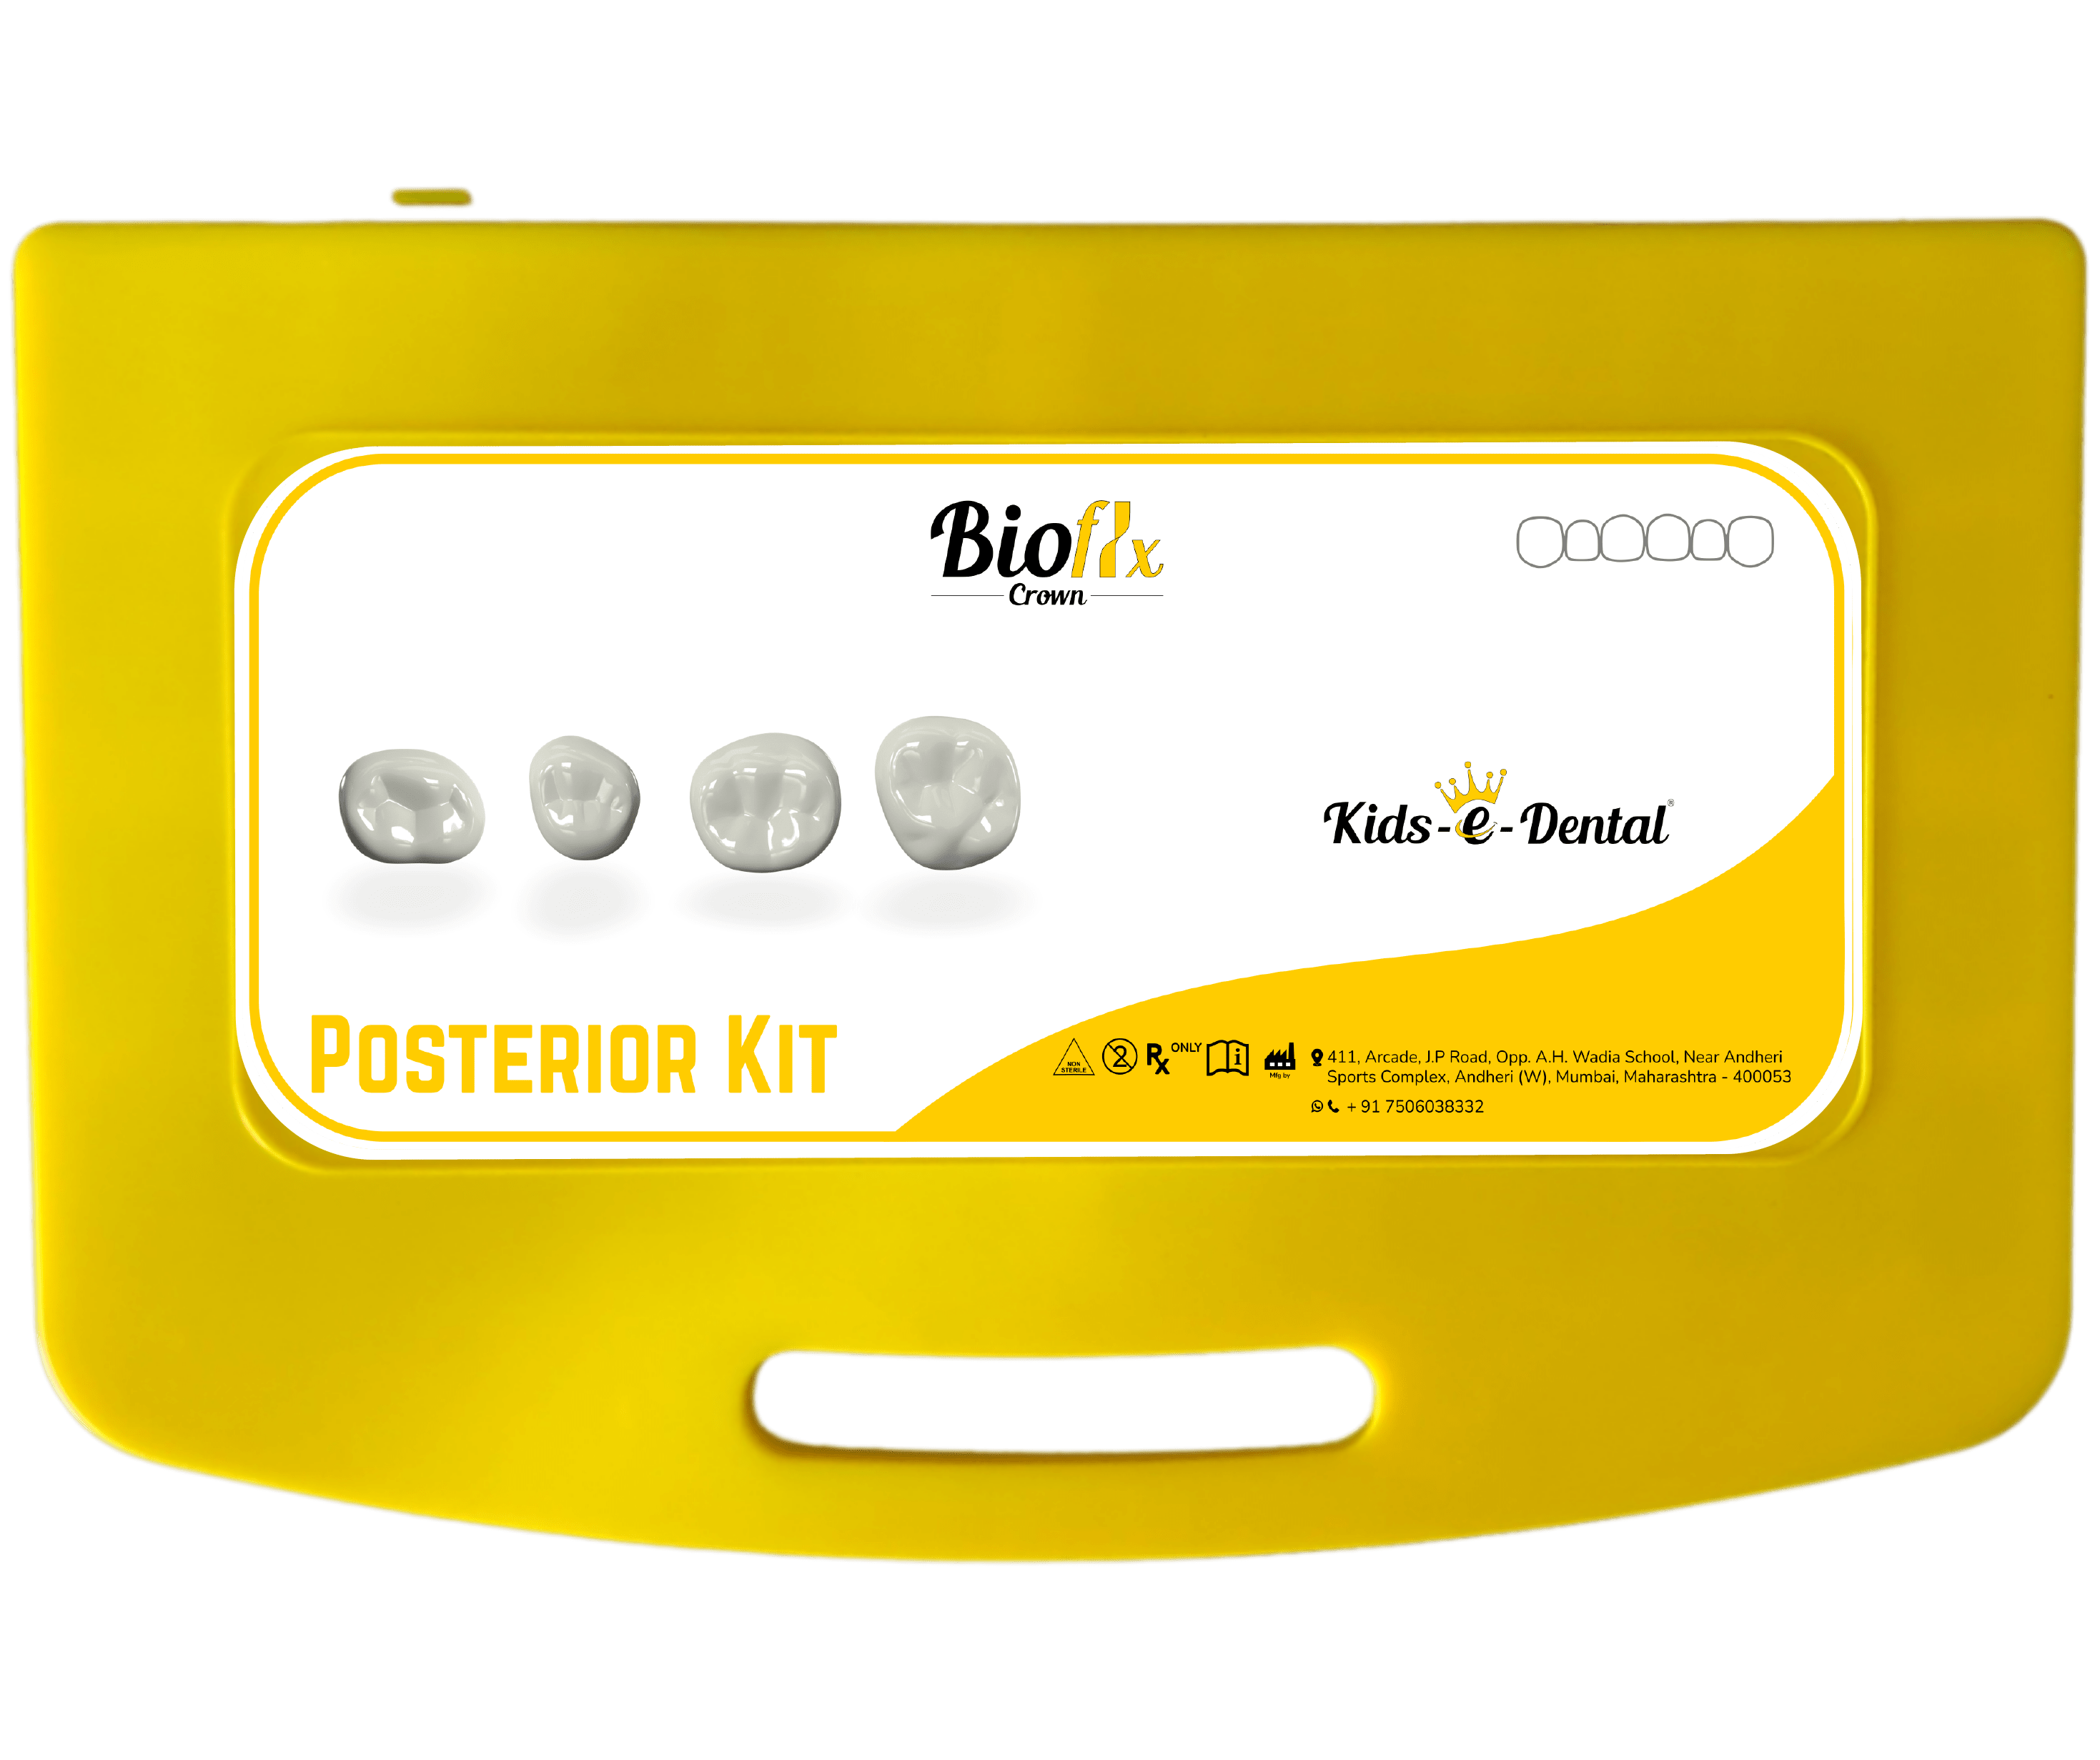 Bioflx Crowns - Posterior First & Second Molar Kit (Trial Kit ) 24 Crowns